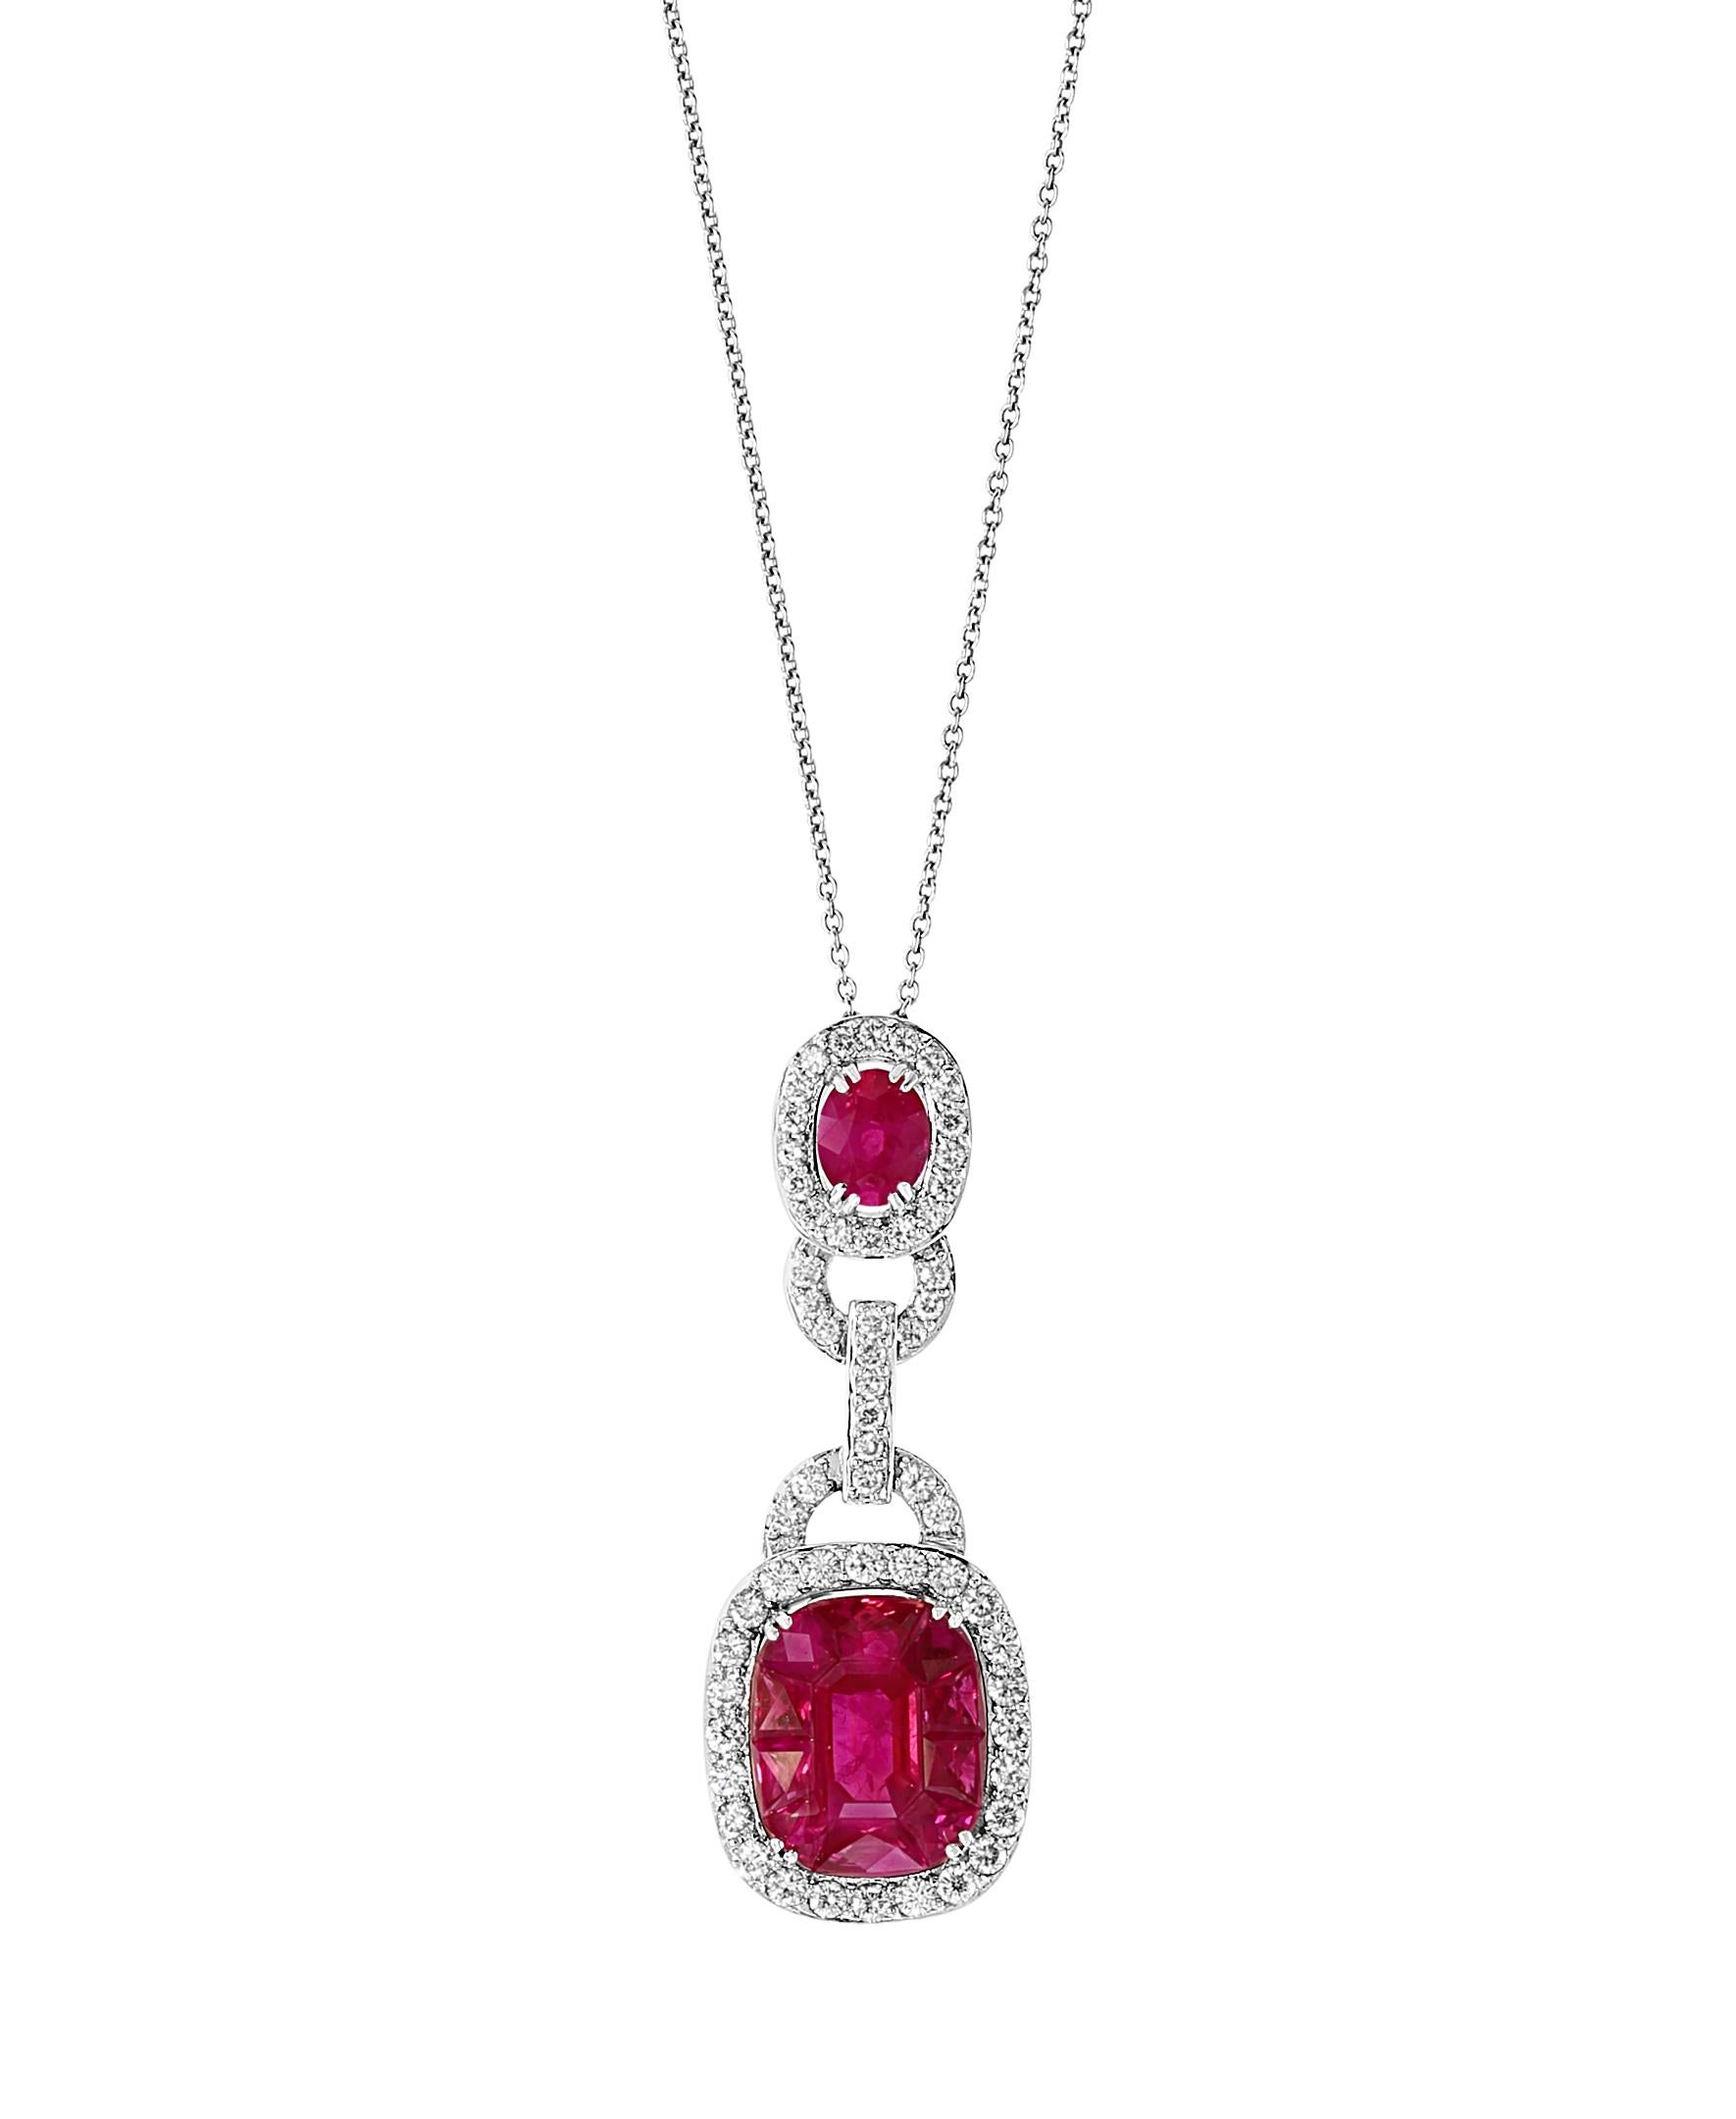 3.5 Carat Natural Burma Ruby and Diamond Pendant or Necklace in 18 Karat Gold In Excellent Condition For Sale In New York, NY